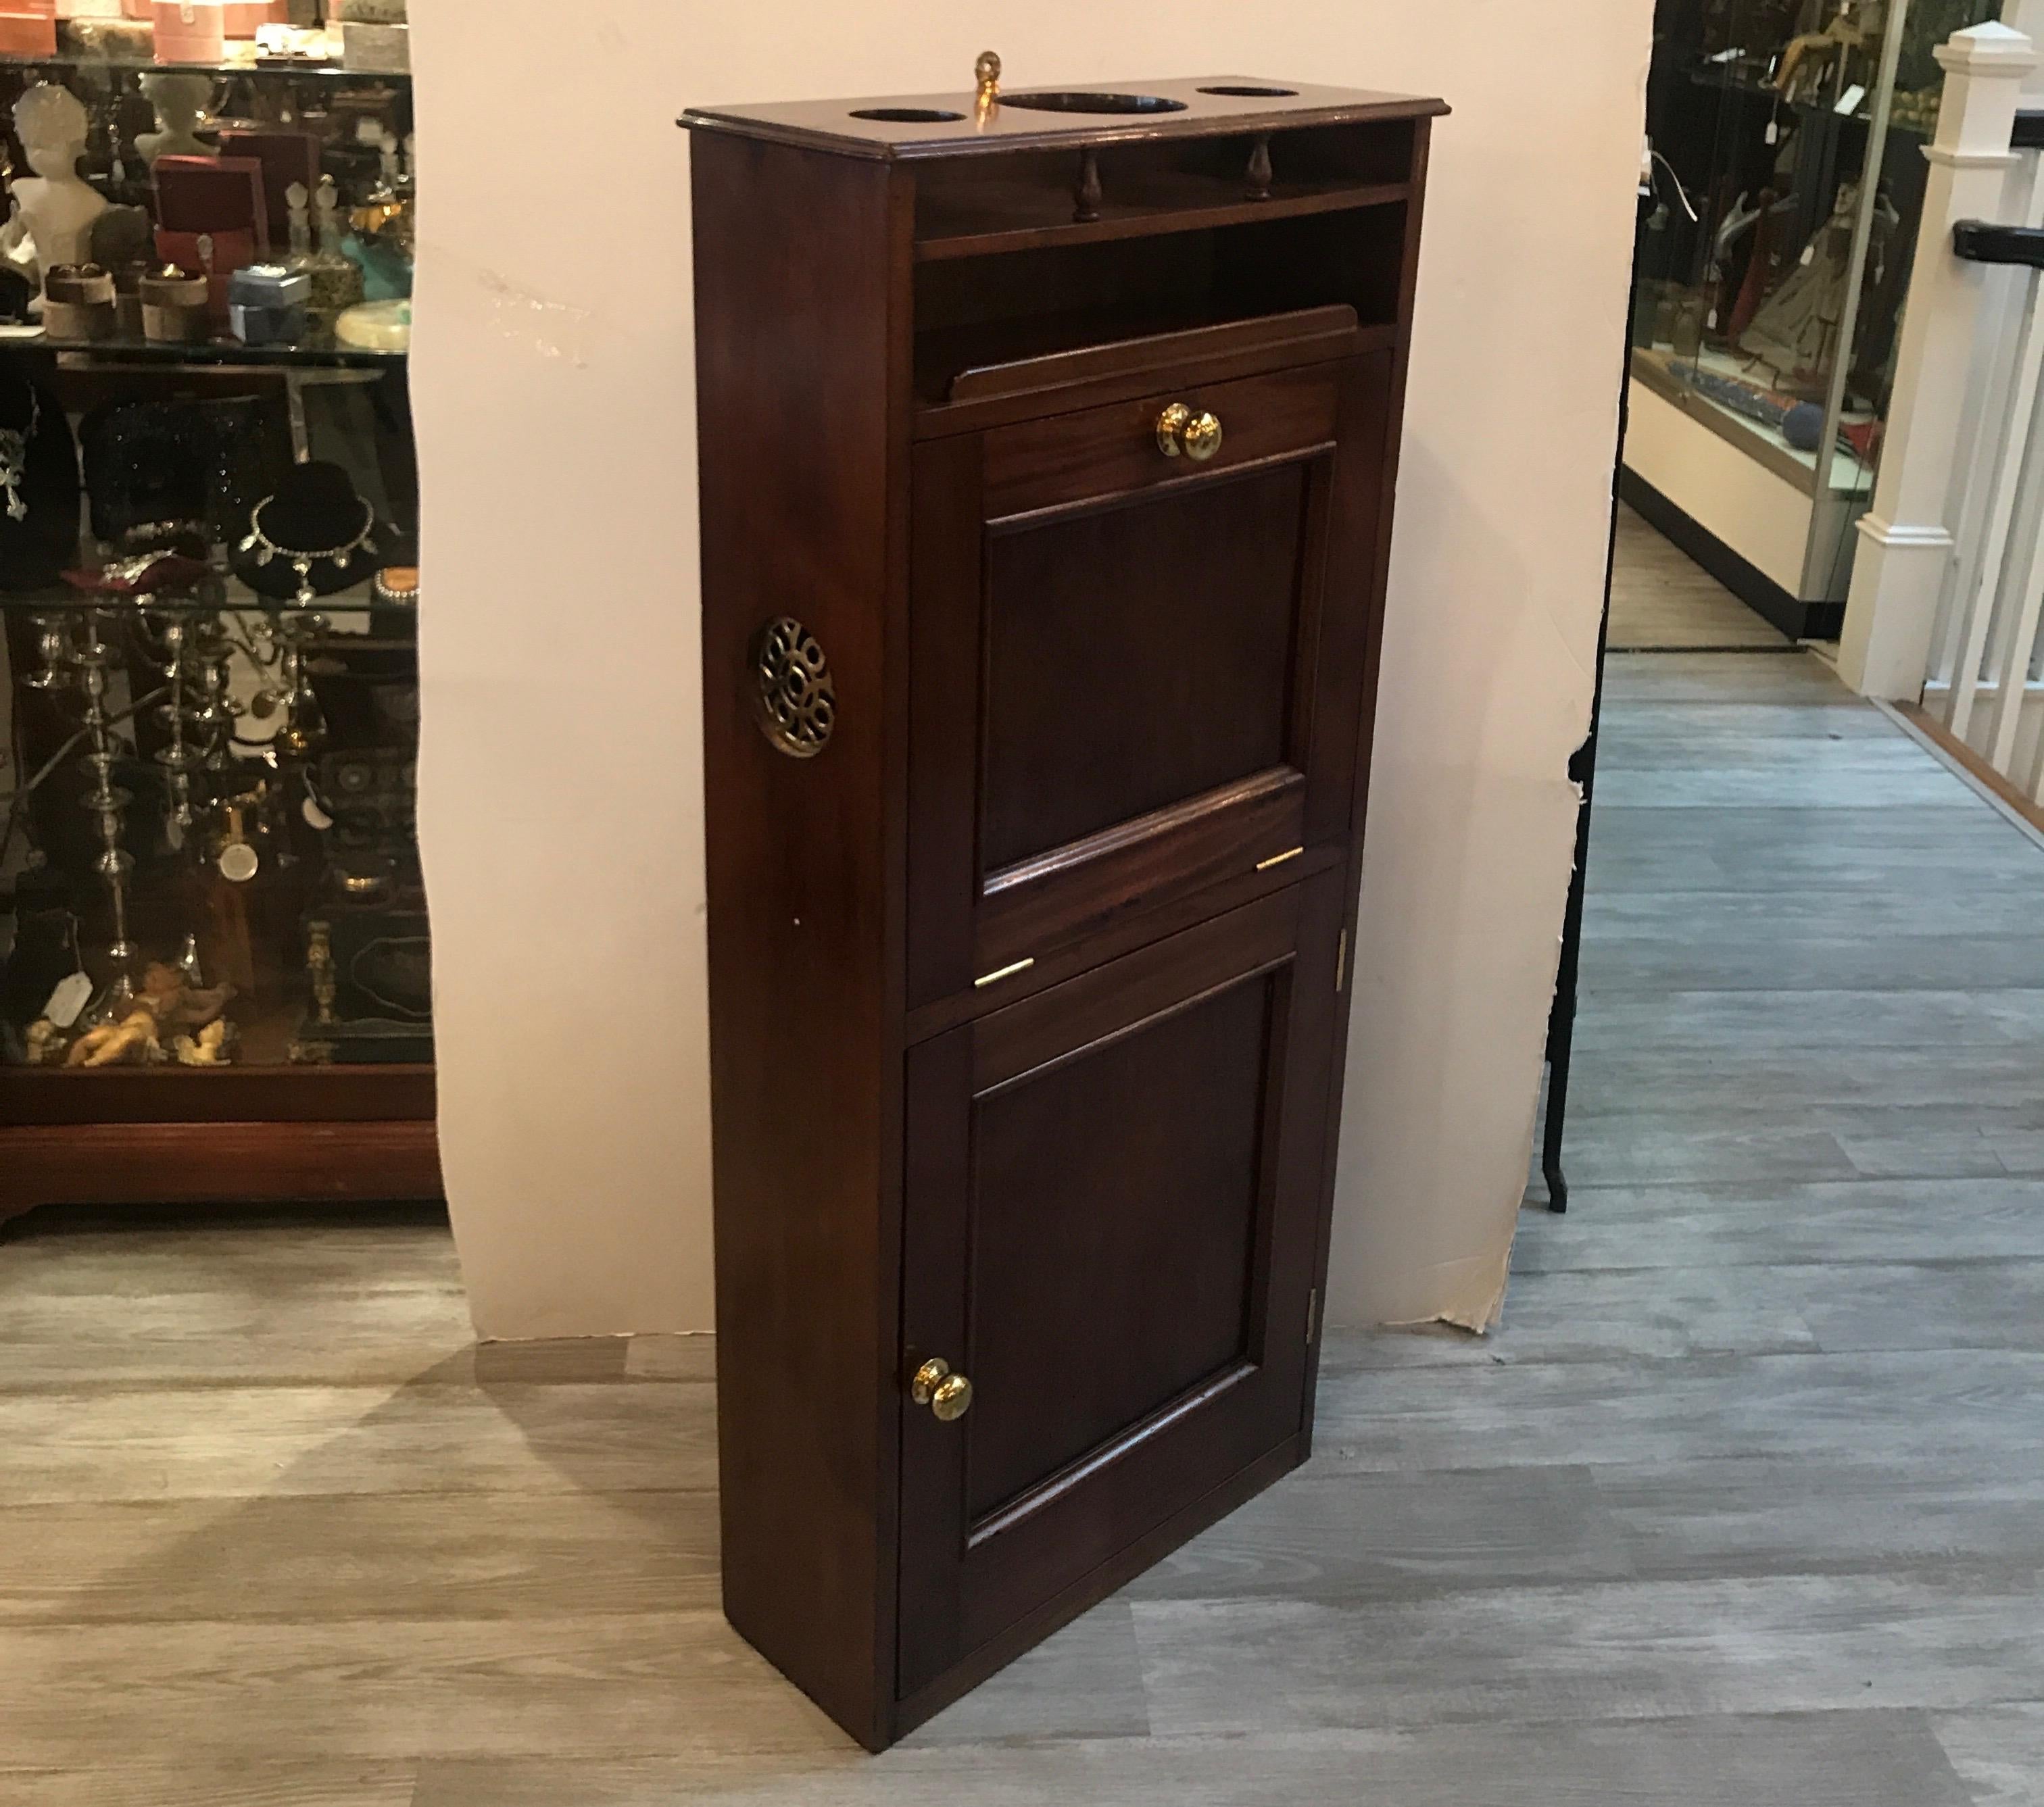 A remarkable mahogany cabinet with a concealed sink. The cabinet was from a 1920s yacht with has a fall front door that reveals a fold out nickel-plated wash basin with a lowed copper pot for used water storage.